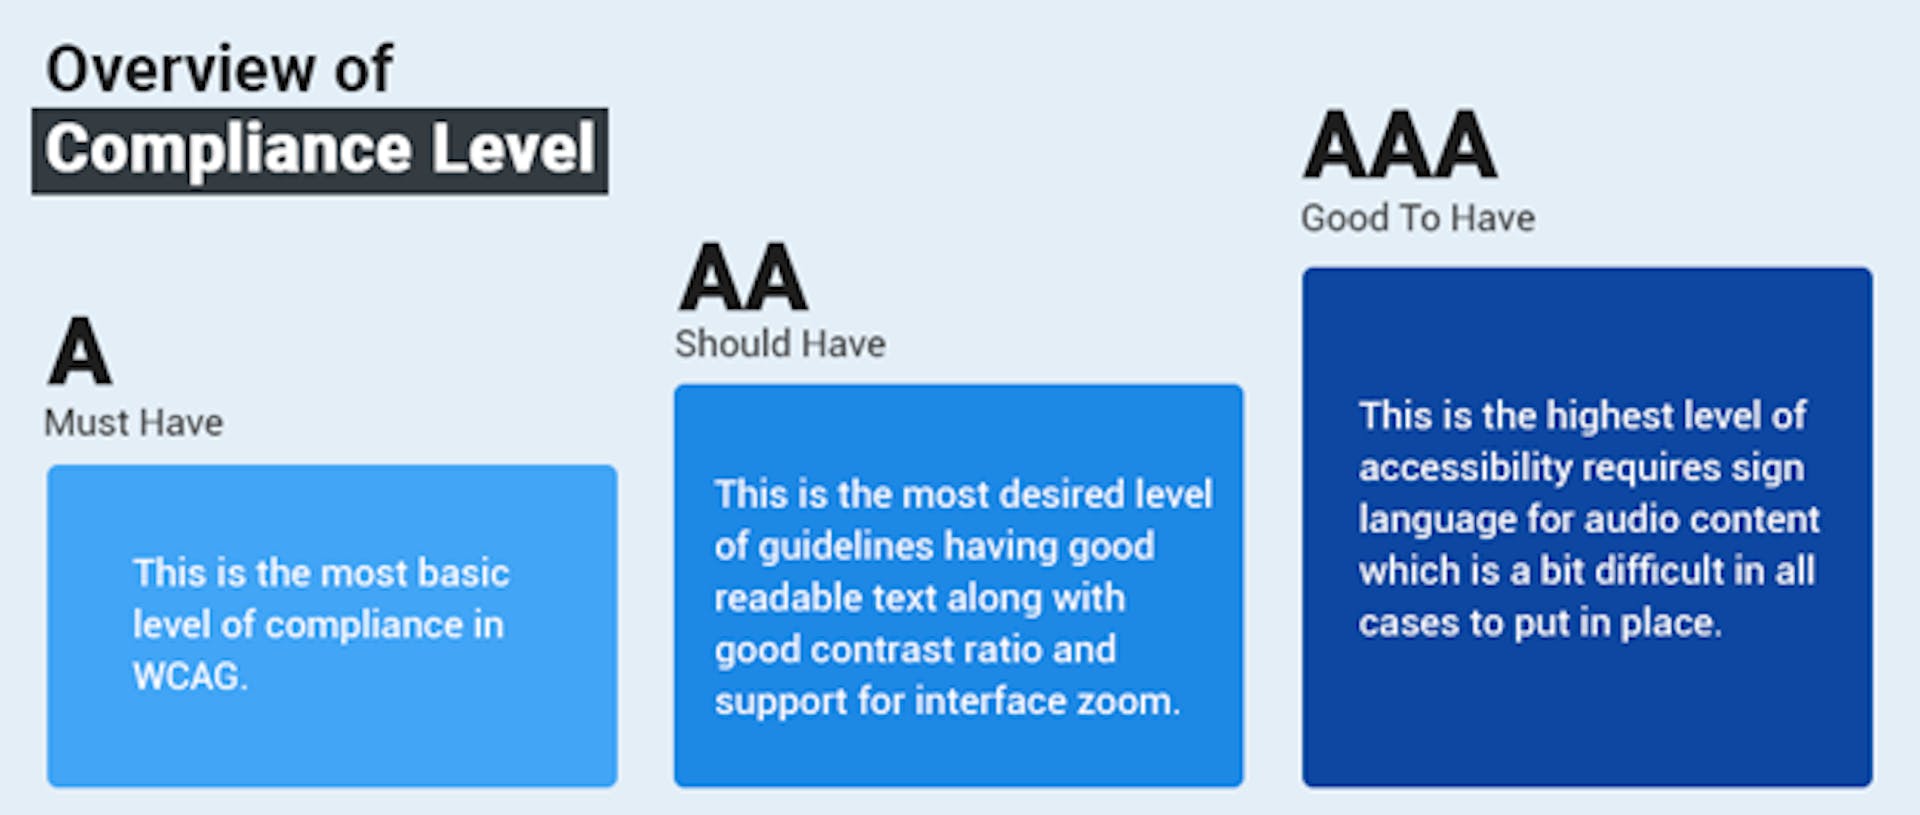 Image explaining compliance levels A, AA, and AAA